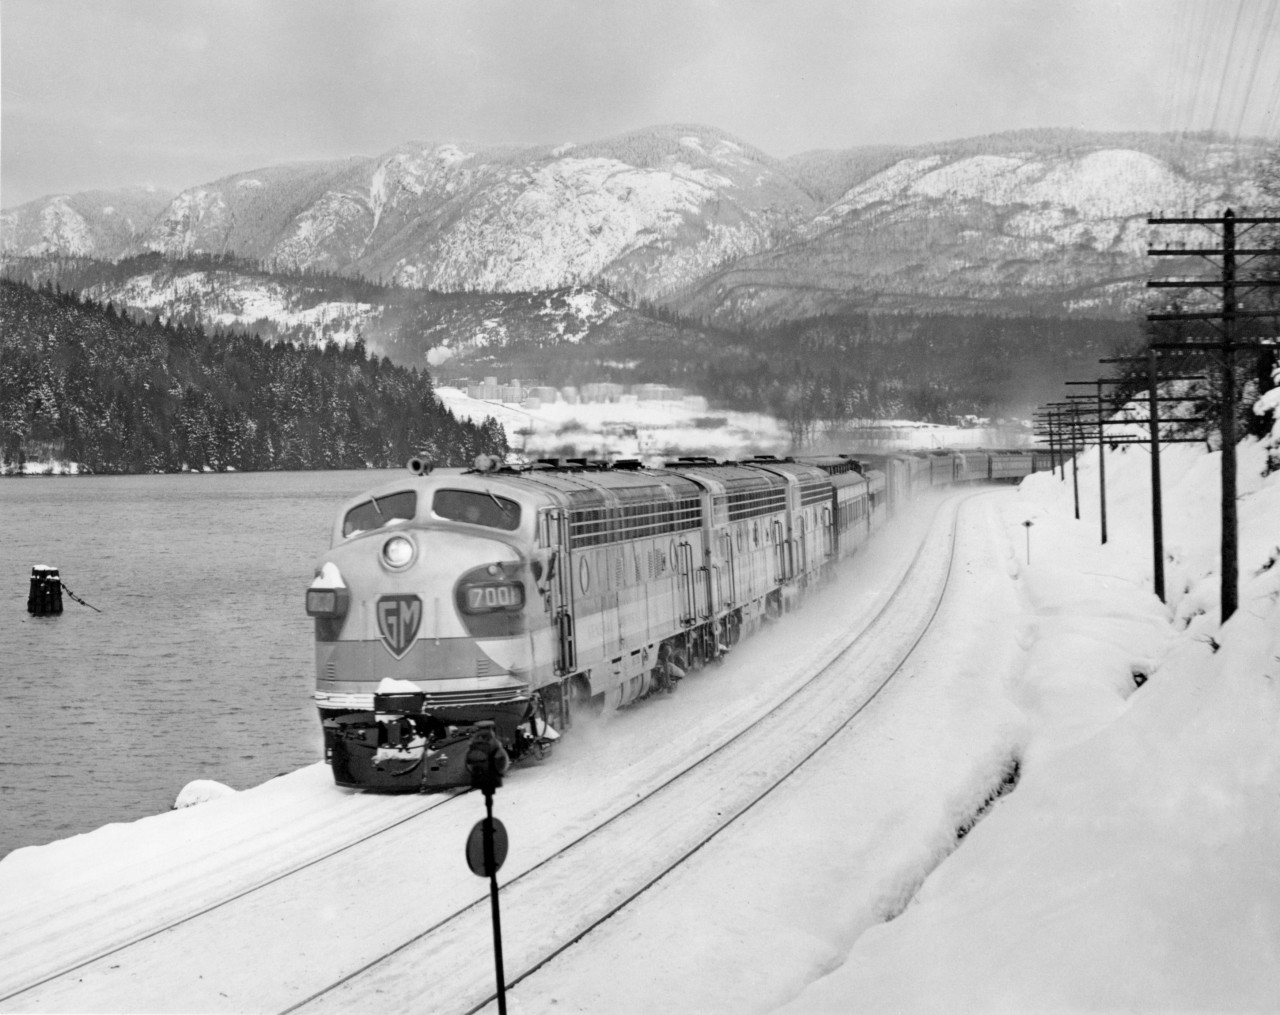 CPR's train no. 7, the first one into Vancouver powered by 4500 H.P. diesel electric on loan to the CPR from General Motors.  The train was almost three hours late.  Consisted of 13 cars and arrived in Vancouver on Friday the 13'th of January, 1950.  Burrard Inlet west of Port Moody by 1.5 miles.

"TEST RUN DOWN FRASER VALLEY   CPR diesel Opens New Rail Era"   By A. J. Darrymple 
  Out of this world!  That's the three-unit royal blue, silver and gold General Motors diesel that pulled CPR's crack transcontinental "Dominion" into Vancouver at 10:50 a.m. today in a history-making test run heralding a new era in transportation developement in Canada.
  Imagine yourself at the head of a power plant 154 feet eight inches in length, with total weight of 718,000 pounds, lifting a string of 13 steel coaches, 1190 tons, up the grades and rolling around the heavy curvatures at 55 miles an hour, and you realize the thrill of railroading.
  Although these diesels have been undergoing exhaustive tests in Ontario, this test run really started from Winnipeg for the 1473 miles to Vancouver under sever winter conditions.
  Reporters, radio newscasters and photographers boarded the train at North Bend before dawn today for the run over the last lap into Vancouver.
  A blizzard roared down the Fraser canyon; and officials of General Electric and CPR checked the operation of the three units under sub-zero conditions.
  In the big, clean, roomy, clear-vision cab, the experts scanned the operational devices and speedmeter as the powerful engines sang their song of high efficiency.
  Veteran Engineer Alfred Fahey handled the throttle with Fireman M. J. Marshall on the left-hand side.  While the window-wipers beat metronome time to the humming wheels, the crew, flanked by a battery of maintenence men and operating instructors, leaned forward peering through the snowy mists.
  Down through Yale and then the frosty Fraser Valley, rolling toward Deroche, passing the stations in a swirl of snow, all intent upon the flashing signals.
  A pin point of green.
  "Clear board," sang the engineer.
  "Clear board," corroborated his mate.
  On through Dewdney and Hatzic, passing the eastbound Huntingdon mixed train at 9:37, and then reaching out for the curving course around Burrard inlet, and through the yards and waving crowds at the station.
  "A fine trip," said D. M. Campbell, General Motors application engineer, "but we would have preferred the test under more rigorous conditions; 15 below was the worst we went through."
  Regardless of the weather, CPR chalked up another first; the first of such power units to be used in transcontinental passenger train through the Rockies; recalling another first, that day, May 23, 1887, when old No. 374 pulled the first passenger train into Vancouver.
  Now the trend is distinctly from time - honored steam to diesel; lower fuel, maintenance and labor costs; improved schedules through reduction of service steops.  Example:  Winnipeg - Vancouver run steam locomotives make 32 stops for water; diesels 10.
  For the passenger:  Smoother stops and starting and a more restful ride; and for the romantic - minded rail-fan, a sleek machine in brilliant color designs, running swiftly and purring like an electric clock.
  CPR officials aboard were T. F. Donald, Winnipeg, assistant superintendent of motive power; G. H. Nowell, Vancouver district master mechanic;  Al Cowburn, assistant superintendent, North Bend; W. Sinclair, Montreal, diesel equipment engineer;  B. W. Woodland, Winnipeg, internal combustion equipment superinvisor; Ernest Hanson, Vancouver, diesel supervisor for Pacific region.
  General Motors officials:  H. D. Dana, assistant general servicee manager;  R. E. Hunter, sales director;  Don Campbell, engineer;  Mel Johnson, service and maintenance engineer;  Frank Switzer, Ed Park, E. Formento, operating instructors.